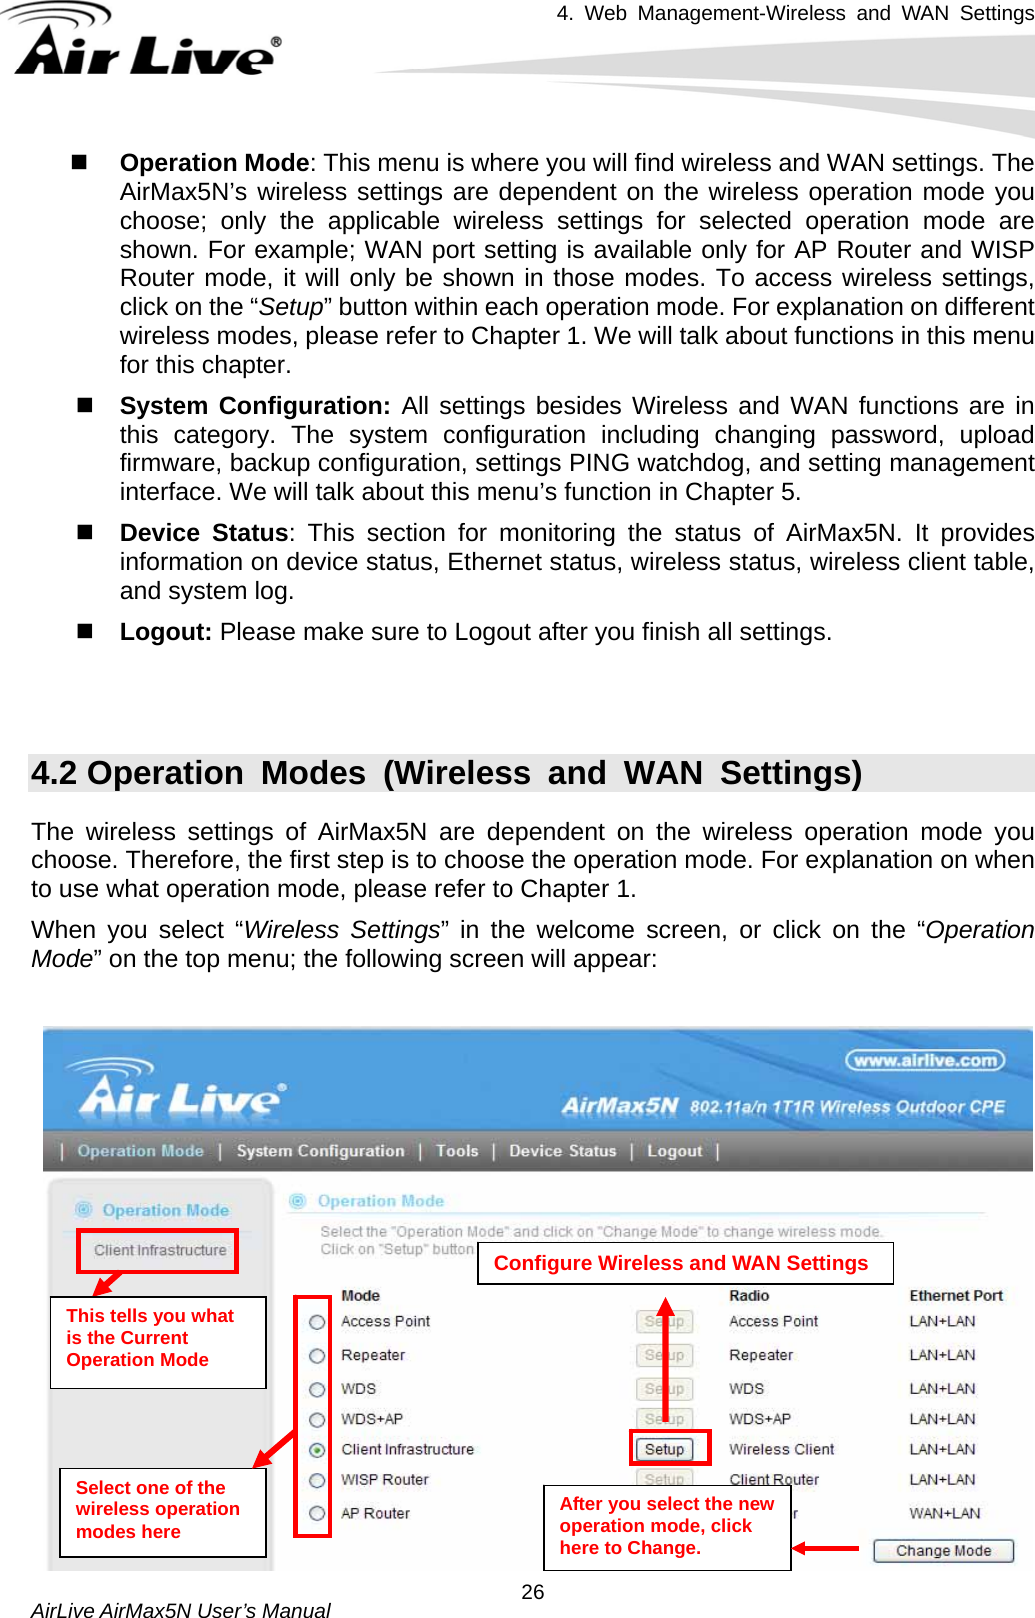 4. Web Management-Wireless and WAN Settings   AirLive AirMax5N User’s Manual  26 Operation Mode: This menu is where you will find wireless and WAN settings. The AirMax5N’s wireless settings are dependent on the wireless operation mode you choose; only the applicable wireless settings for selected operation mode are shown. For example; WAN port setting is available only for AP Router and WISP Router mode, it will only be shown in those modes. To access wireless settings, click on the “Setup” button within each operation mode. For explanation on different wireless modes, please refer to Chapter 1. We will talk about functions in this menu for this chapter.  System Configuration: All settings besides Wireless and WAN functions are in this category. The system configuration including changing password, upload firmware, backup configuration, settings PING watchdog, and setting management interface. We will talk about this menu’s function in Chapter 5.  Device Status: This section for monitoring the status of AirMax5N. It provides information on device status, Ethernet status, wireless status, wireless client table, and system log.    Logout: Please make sure to Logout after you finish all settings.   4.2 Operation Modes (Wireless and WAN Settings) The wireless settings of AirMax5N are dependent on the wireless operation mode you choose. Therefore, the first step is to choose the operation mode. For explanation on when to use what operation mode, please refer to Chapter 1.   When you select “Wireless Settings” in the welcome screen, or click on the “Operation Mode” on the top menu; the following screen will appear:  Configure Wireless and WAN Settings    This tells you what is the Current Operation Mode Select one of the wireless operation modes here After you select the new operation mode, click here to Change. 